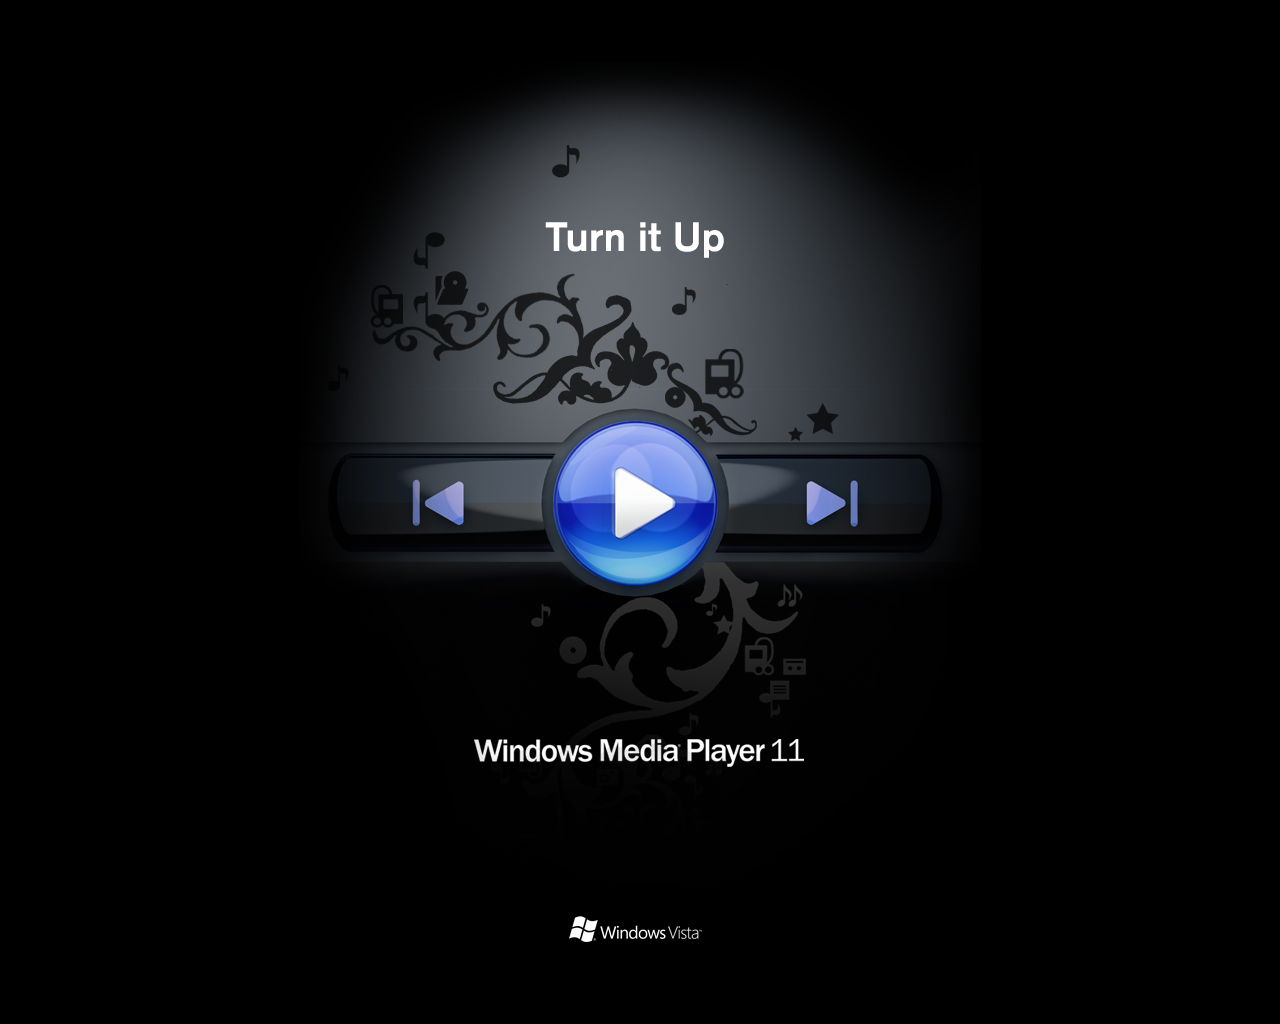 where to download a copy of Windows Media Player 11